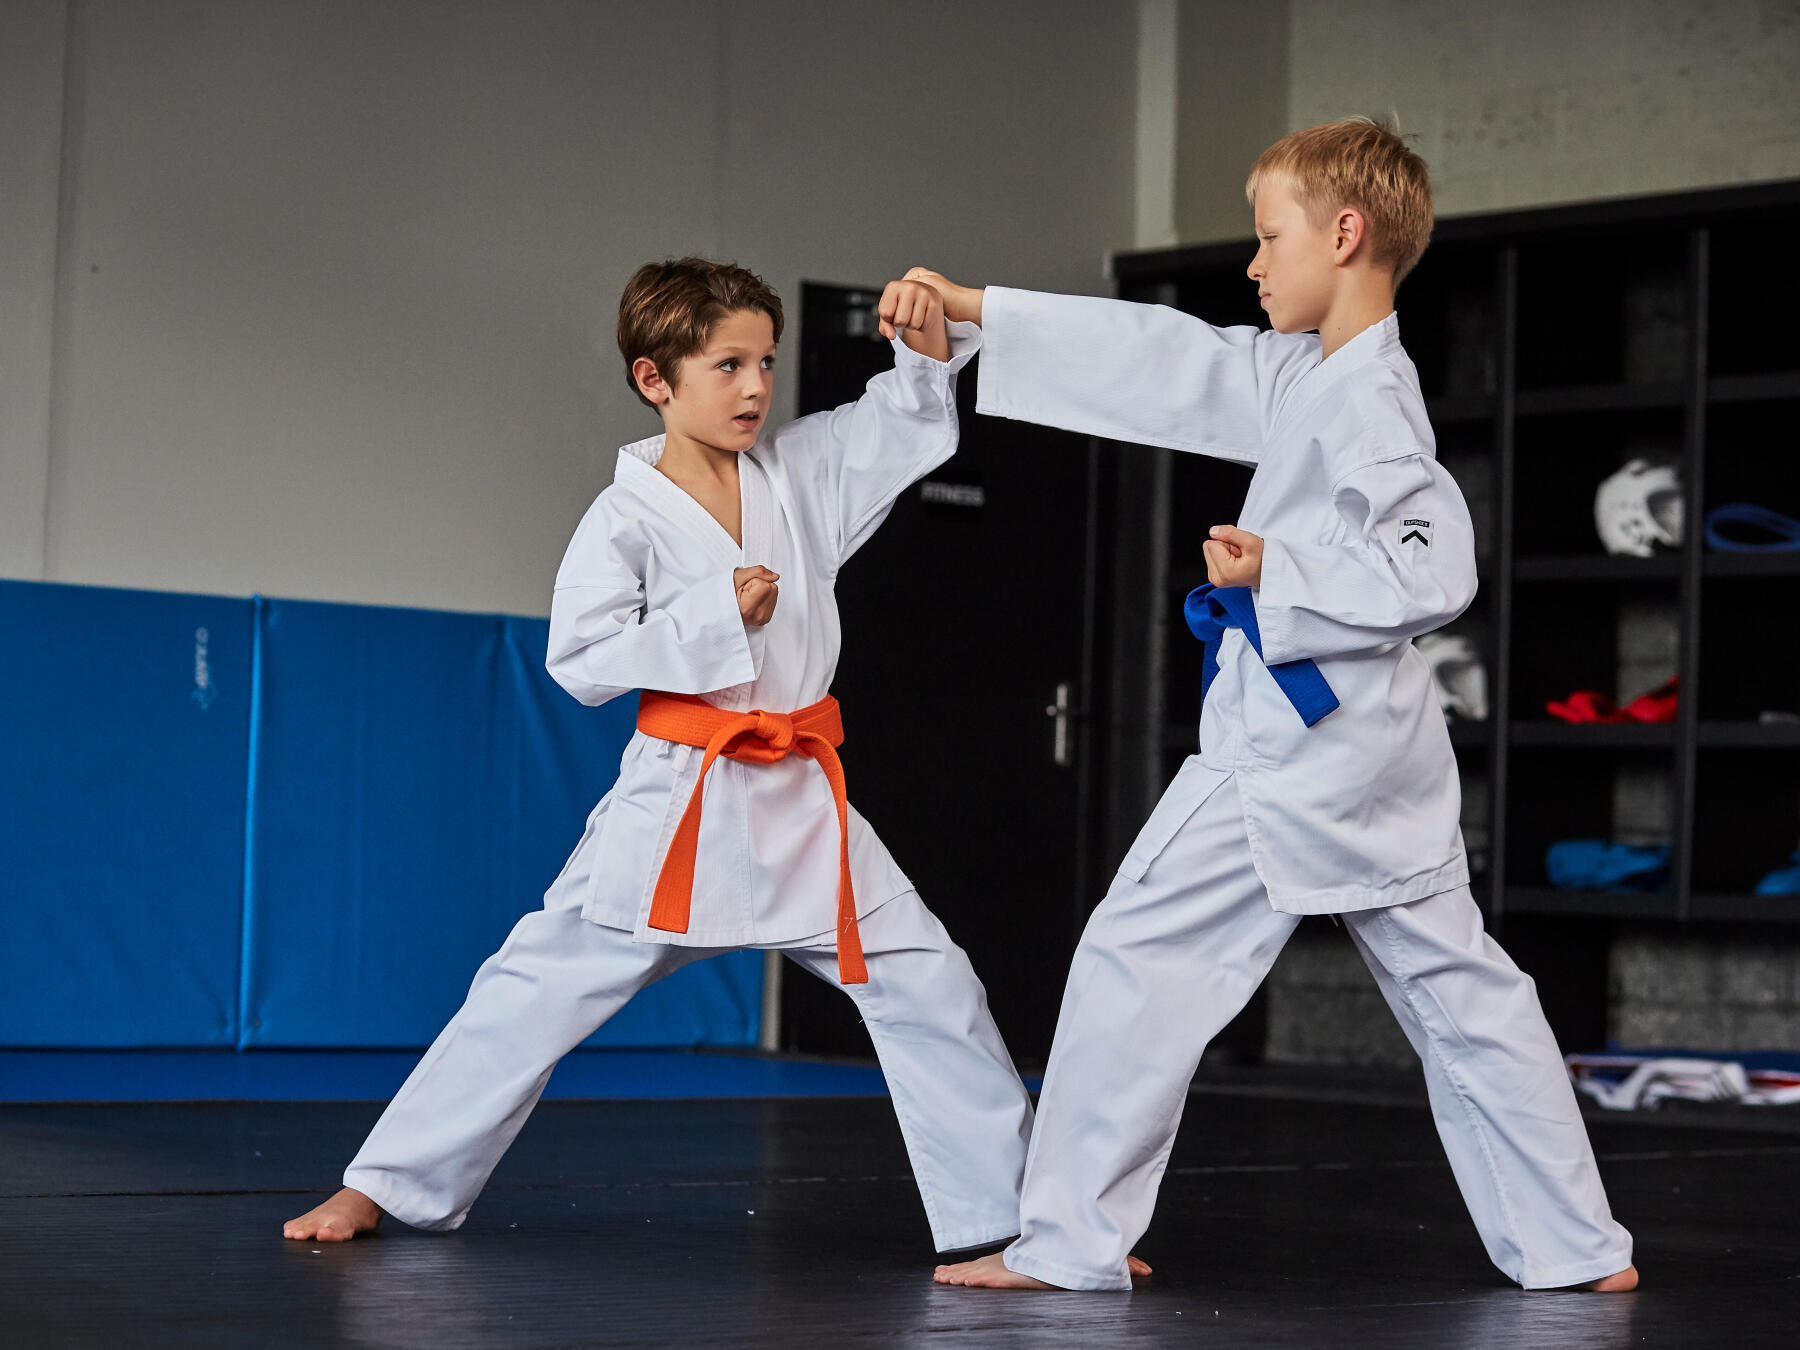 two young boys doing karate